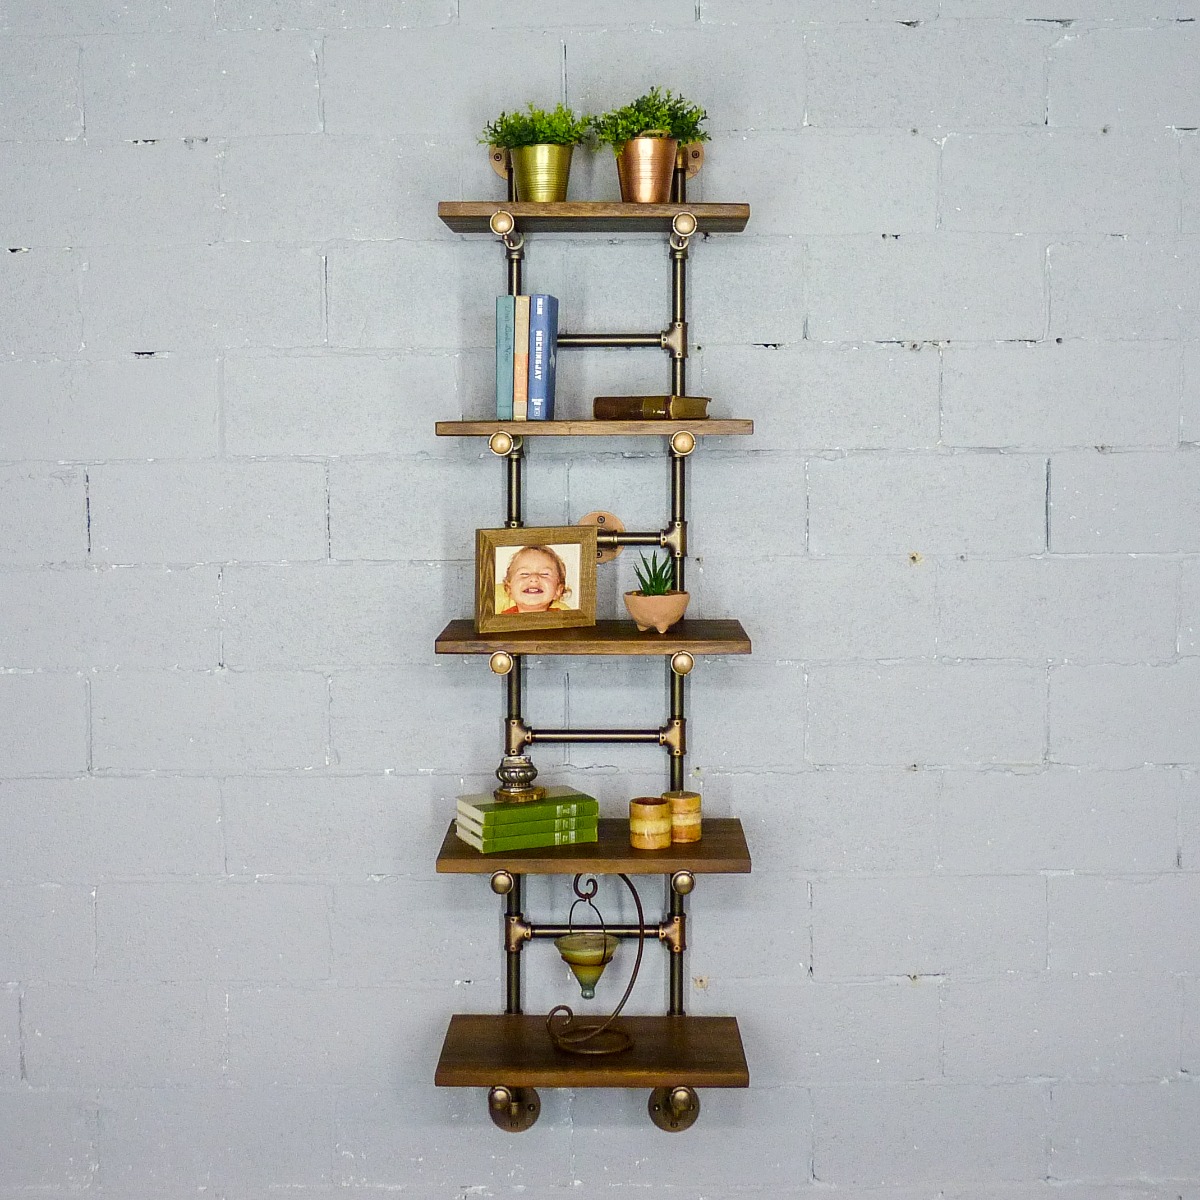 Swu1-bz-bz-br Phoenix Modern Industrial Ladder Wall Mounted Bookcase, Rustic Bronze Combo With Light Brown Stained Wood